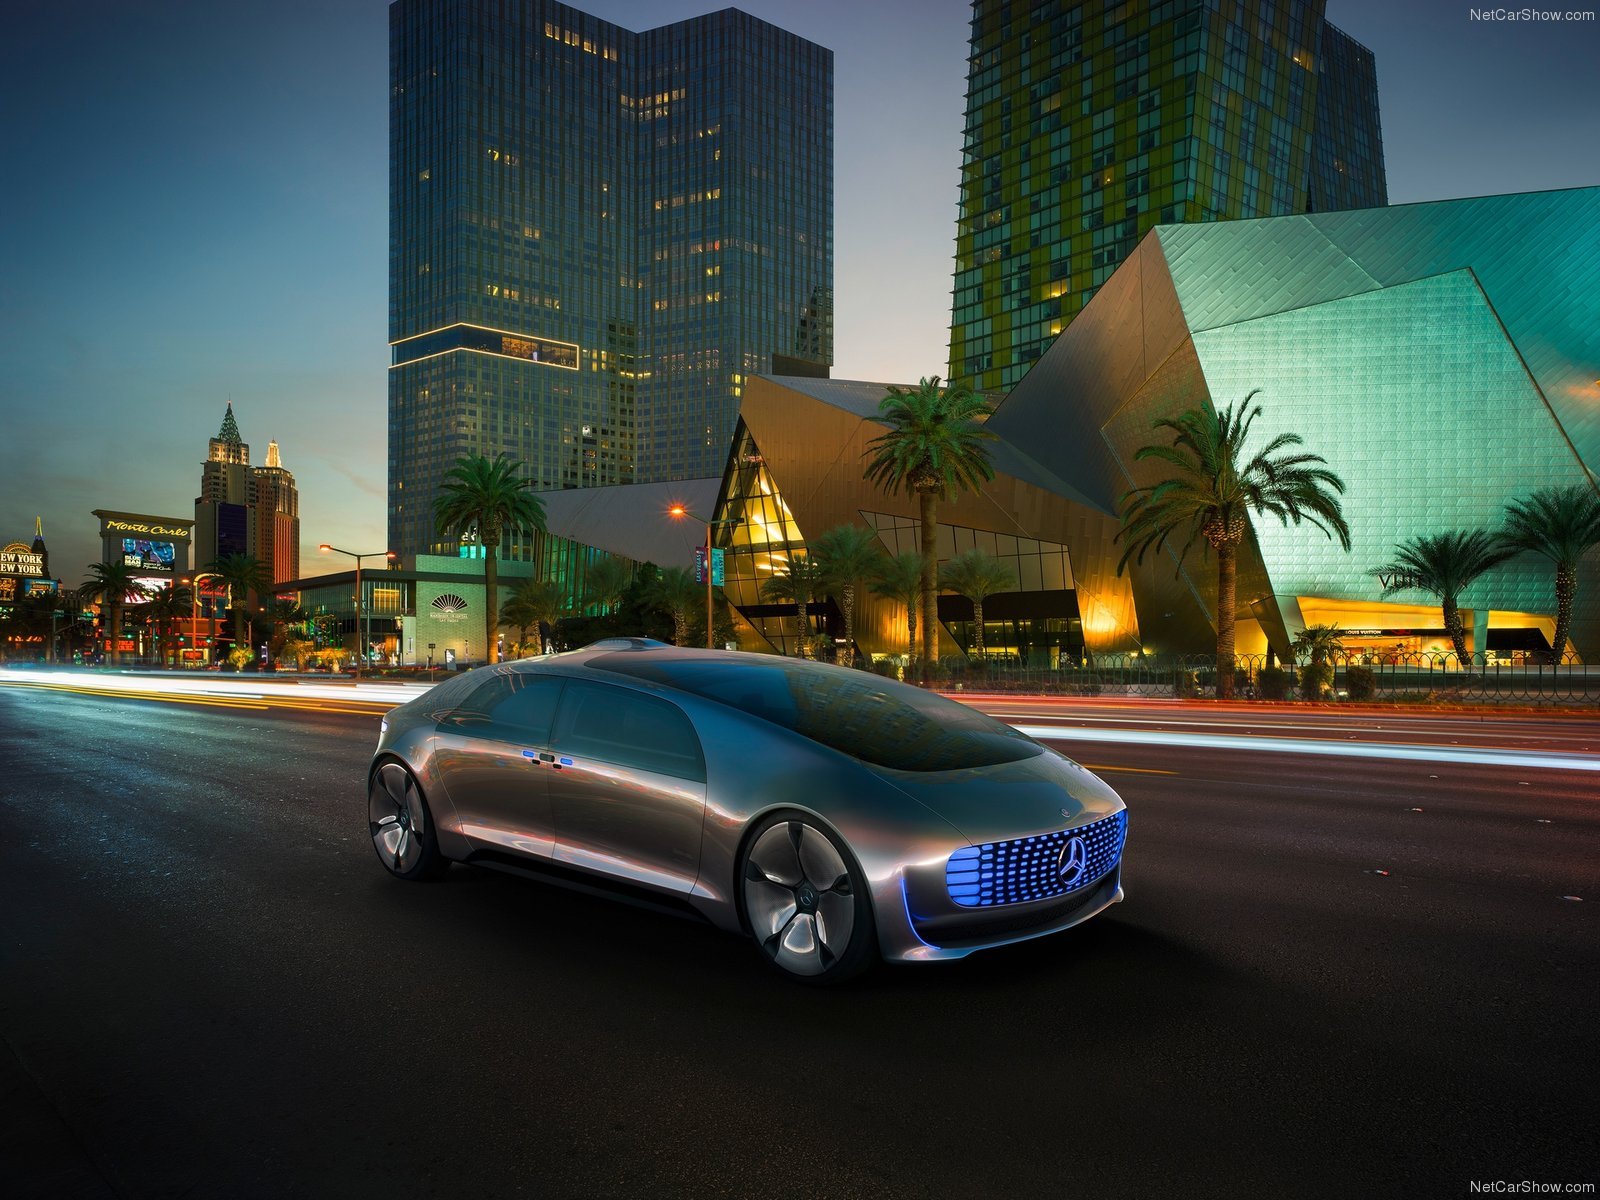 mercedes, Benz, F015, Luxury, In, Motion, Concept, Cars Wallpaper